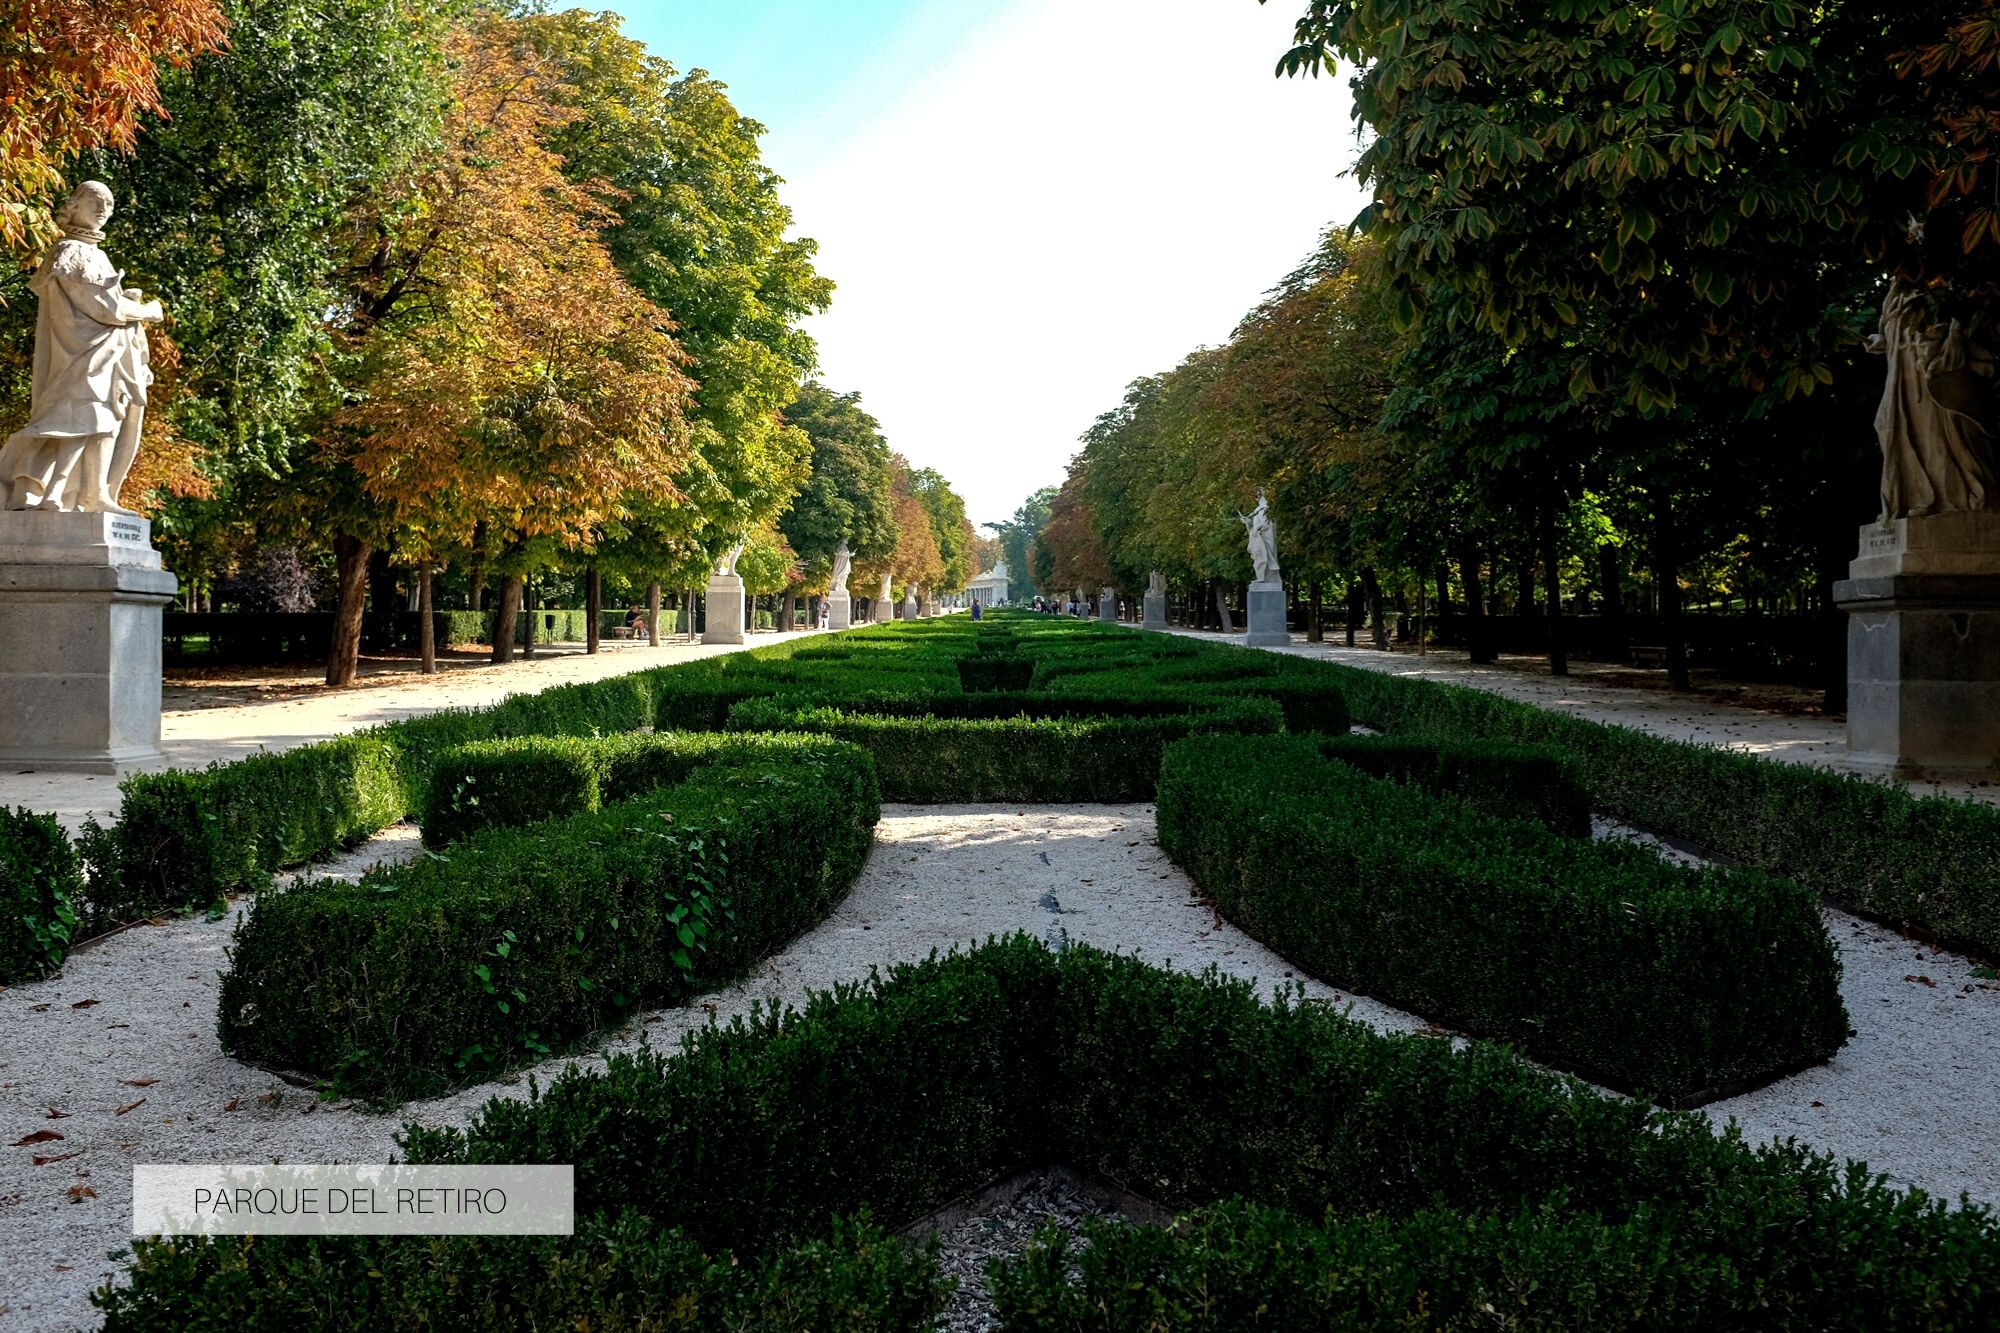 Gardens of the Parque del Retiro with sculptures along the path